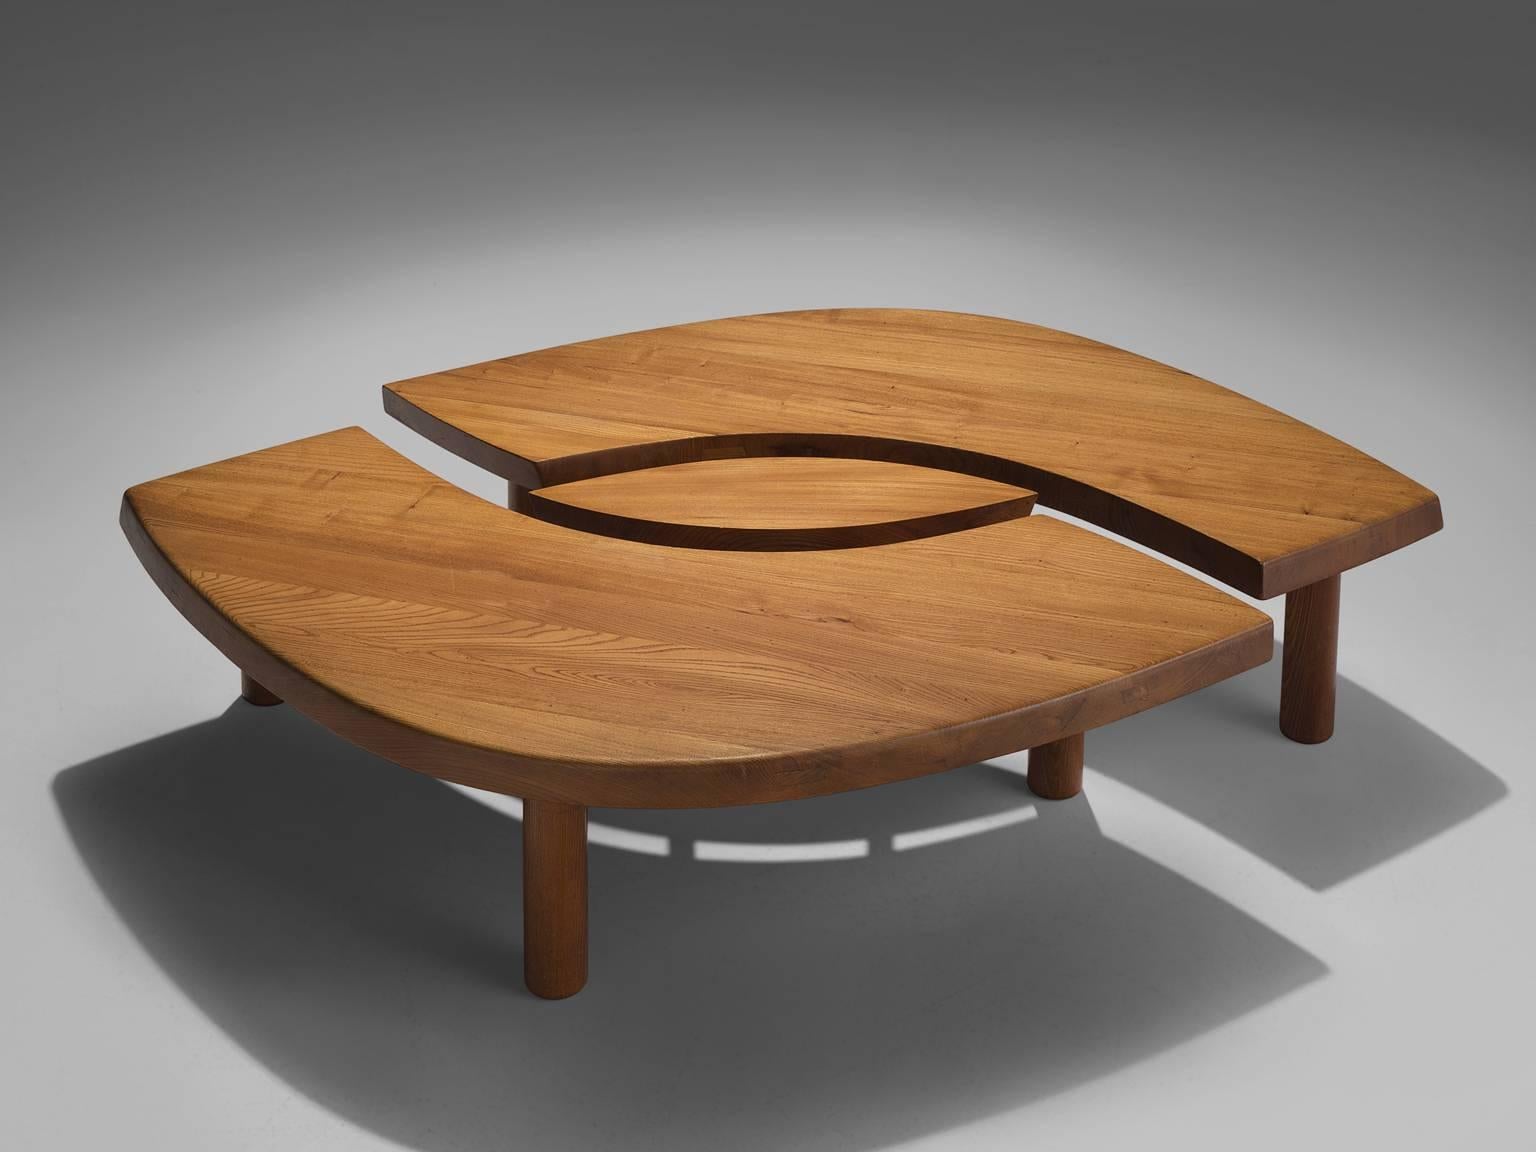 Pierre Chapo, coffee table, model T22C, elm, France, ca. 1972.

This beautiful eye-shaped cocktail table is part of the midcentury design collection. The coffee table is designed by the French designer and master woodworker Pierre Chapo (1927-1987).